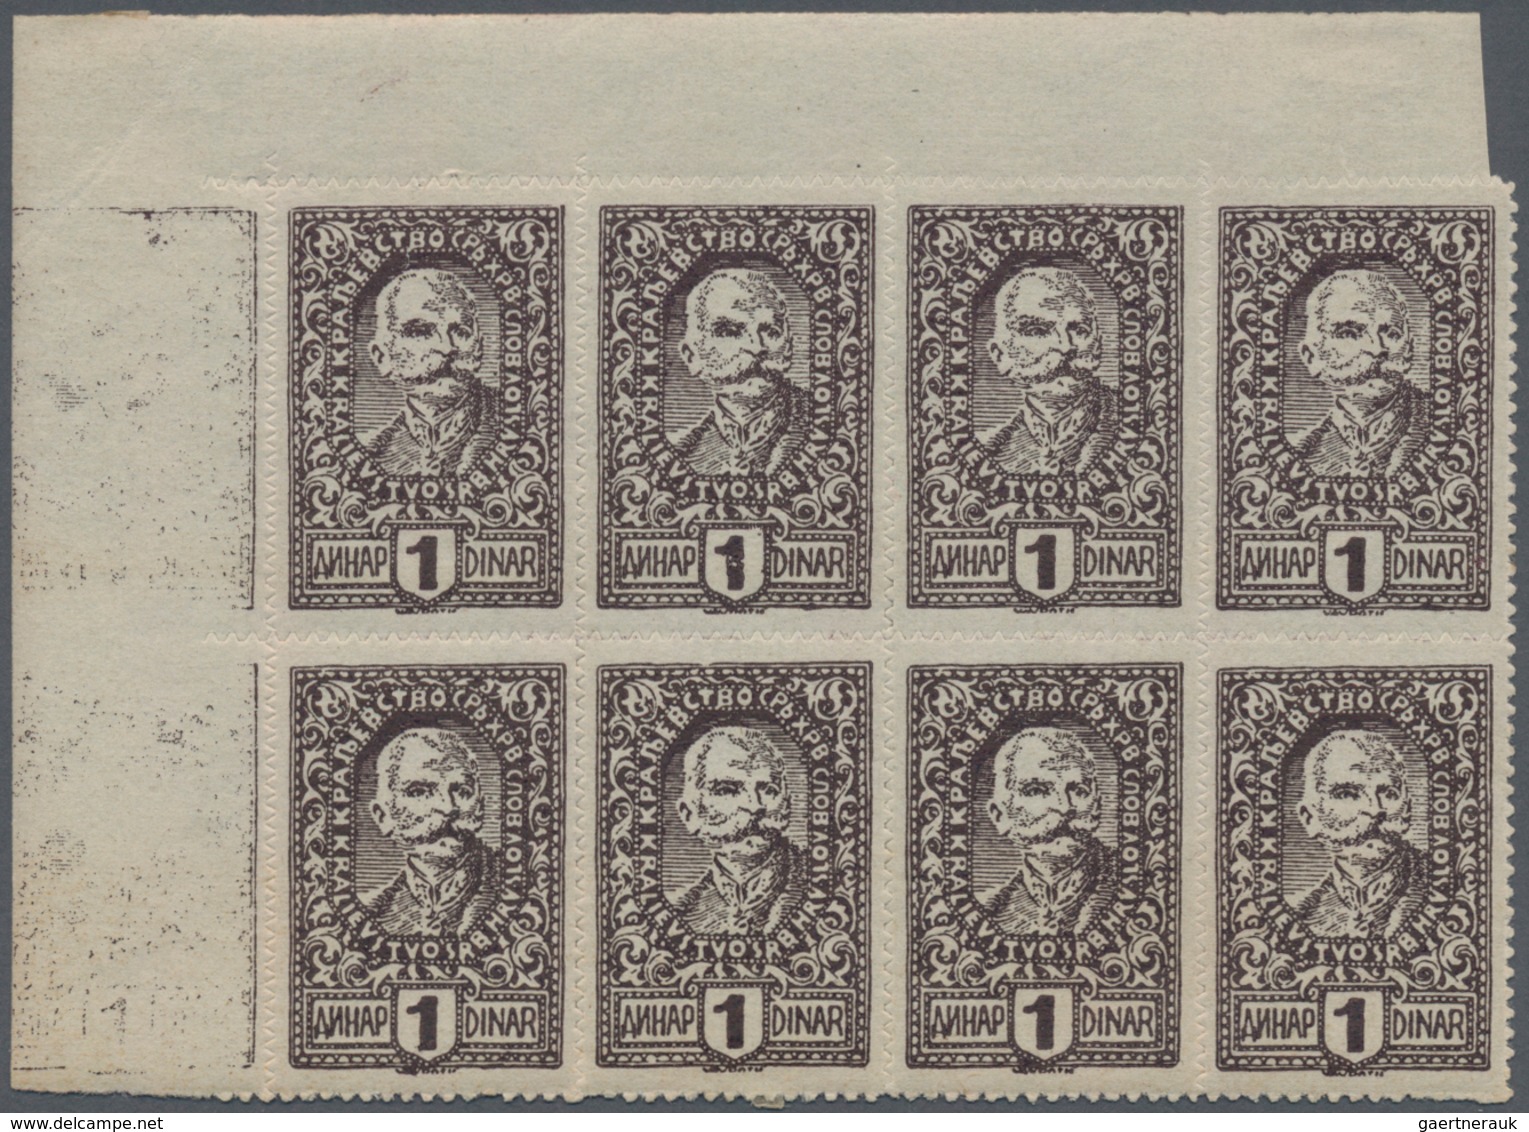 Jugoslawien: 1920. "Chanbreakers" Varieties. Four stock card with various degrees of OFFSETS of the